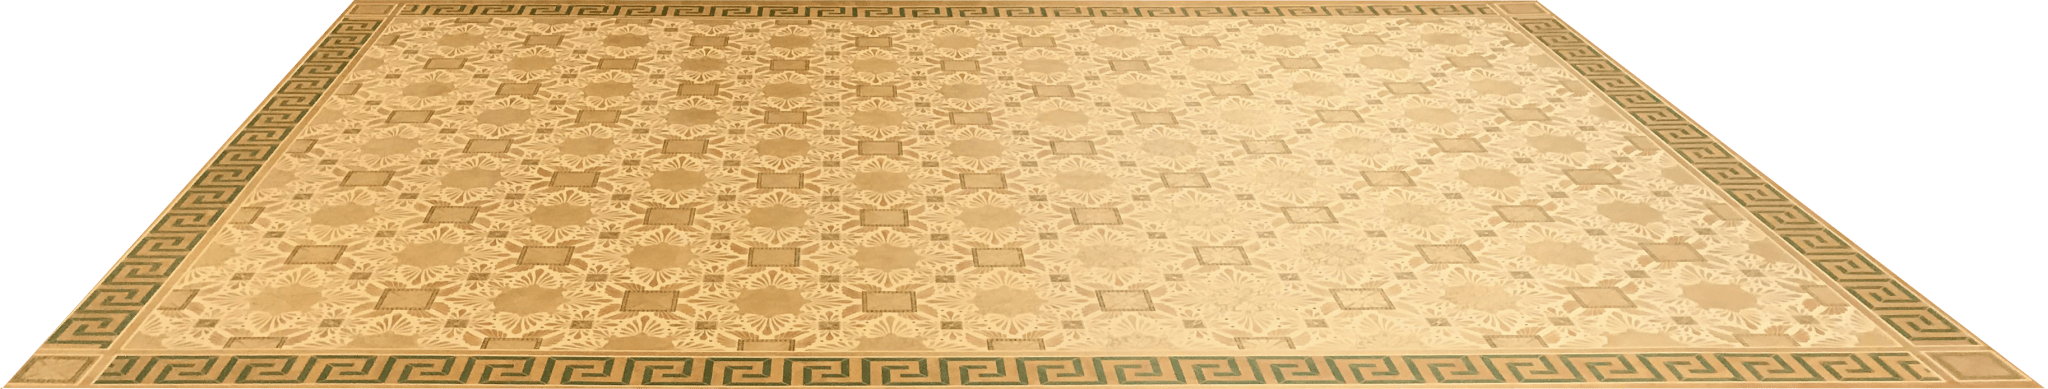 This is the full image for this 300 square foot floorcloth, based on a design by Christopher Dresser.